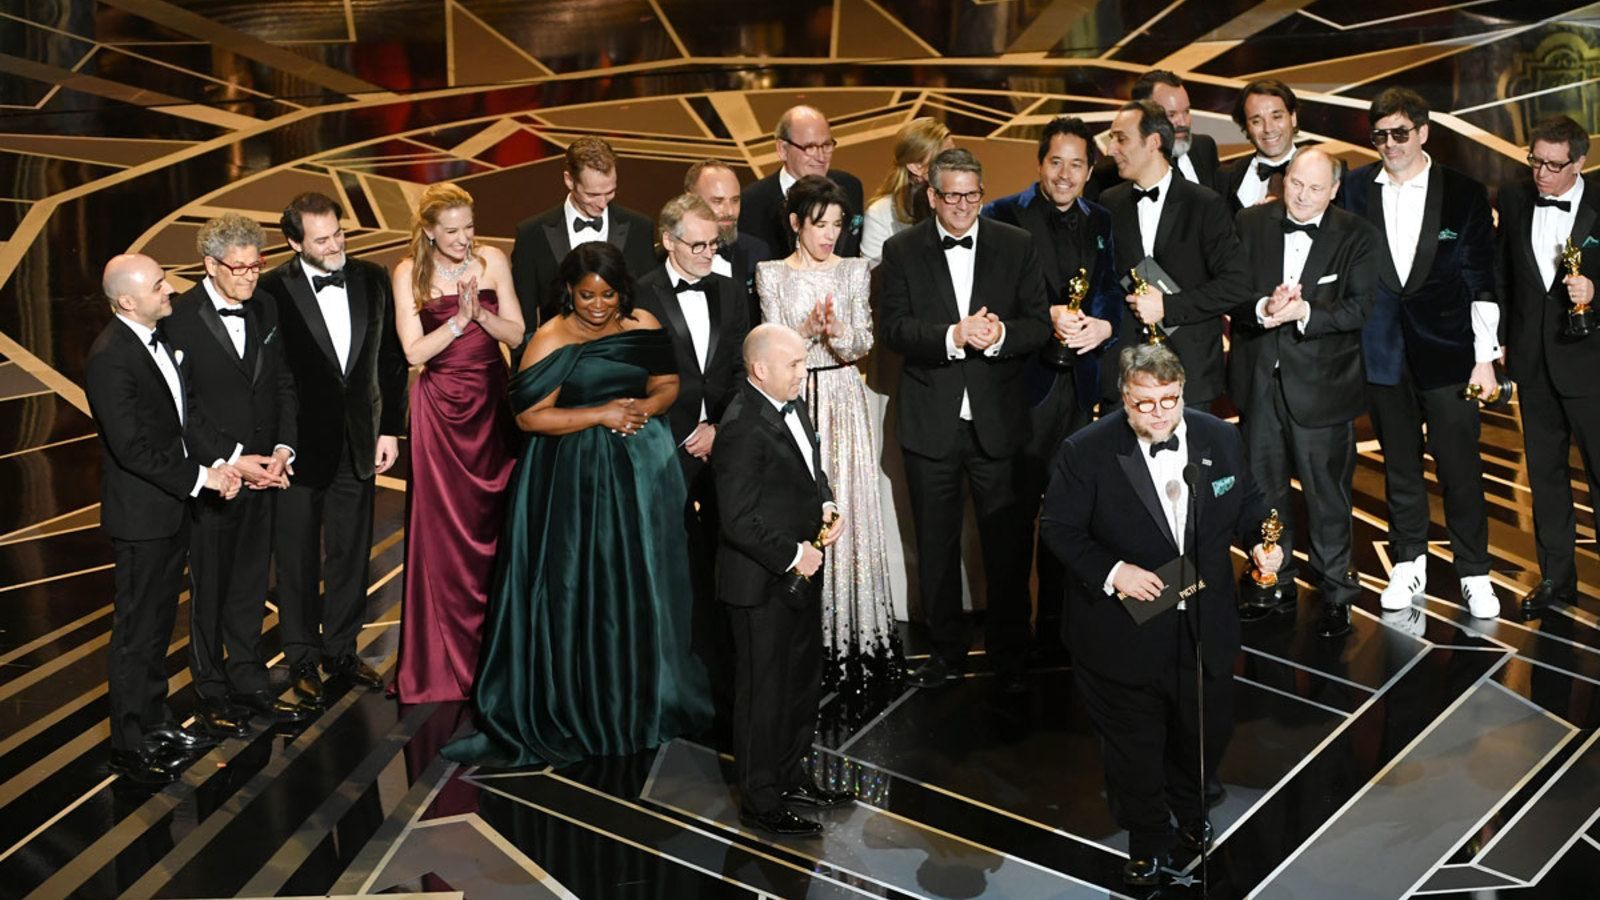 Producer J. Miles Dale (L), director Guillermo del Toro (at microphone) and cast/crew accept Best Picture for 'The Shape of Water' onstage during the 90th Annual Academy Awards at the Dolby Theatre at Hollywood & Highland Center on March 4, 2018 in Hollywood, California. (Photo by Kevin Winter/Getty Images)